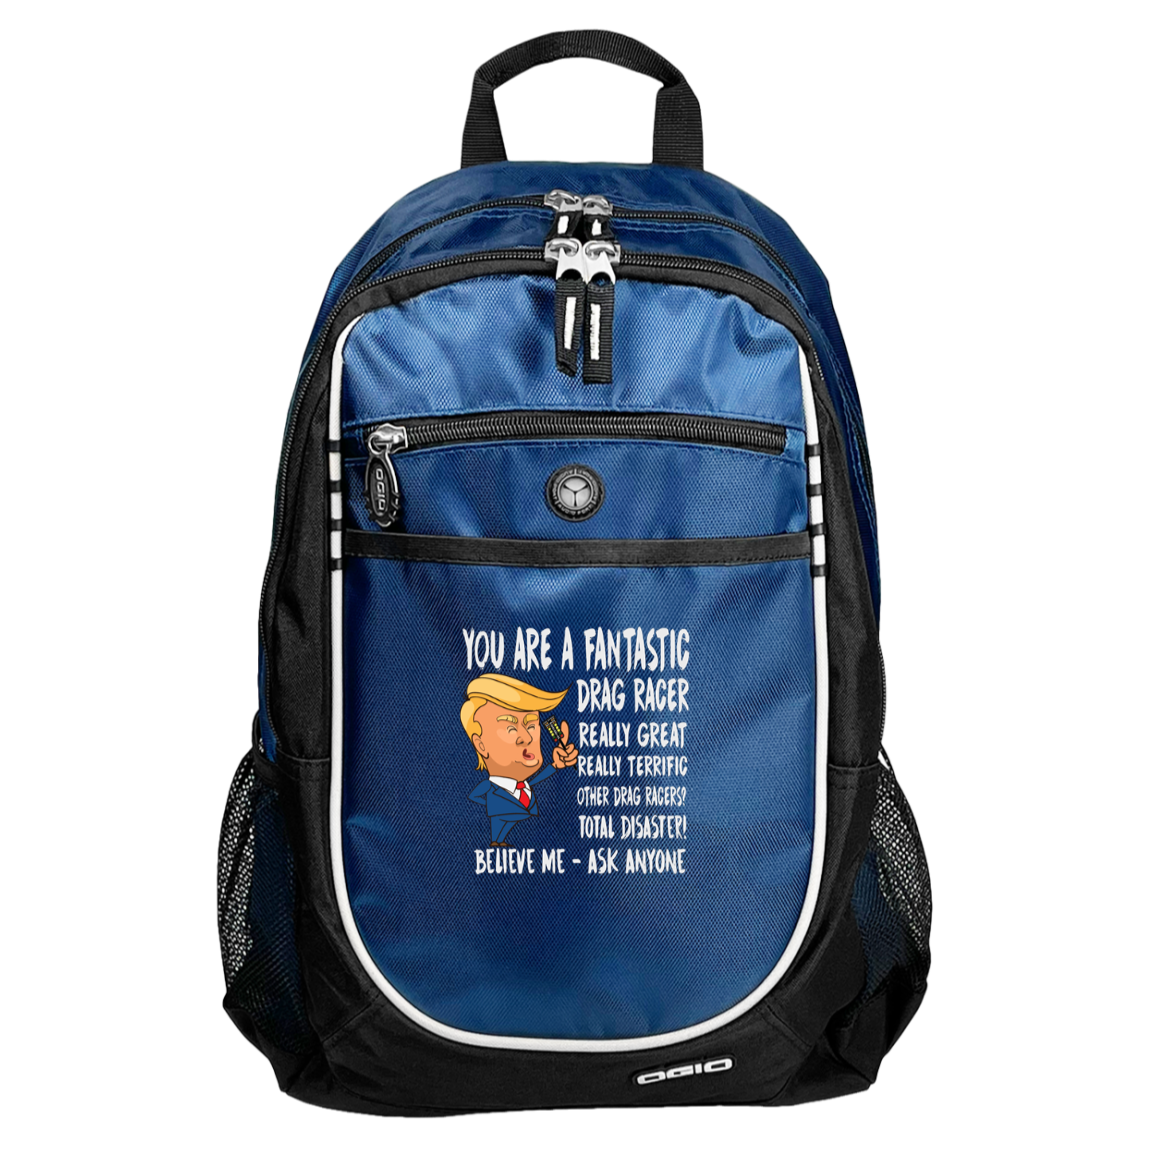 You're A Fantastic Drag Racer Bags and Backpacks